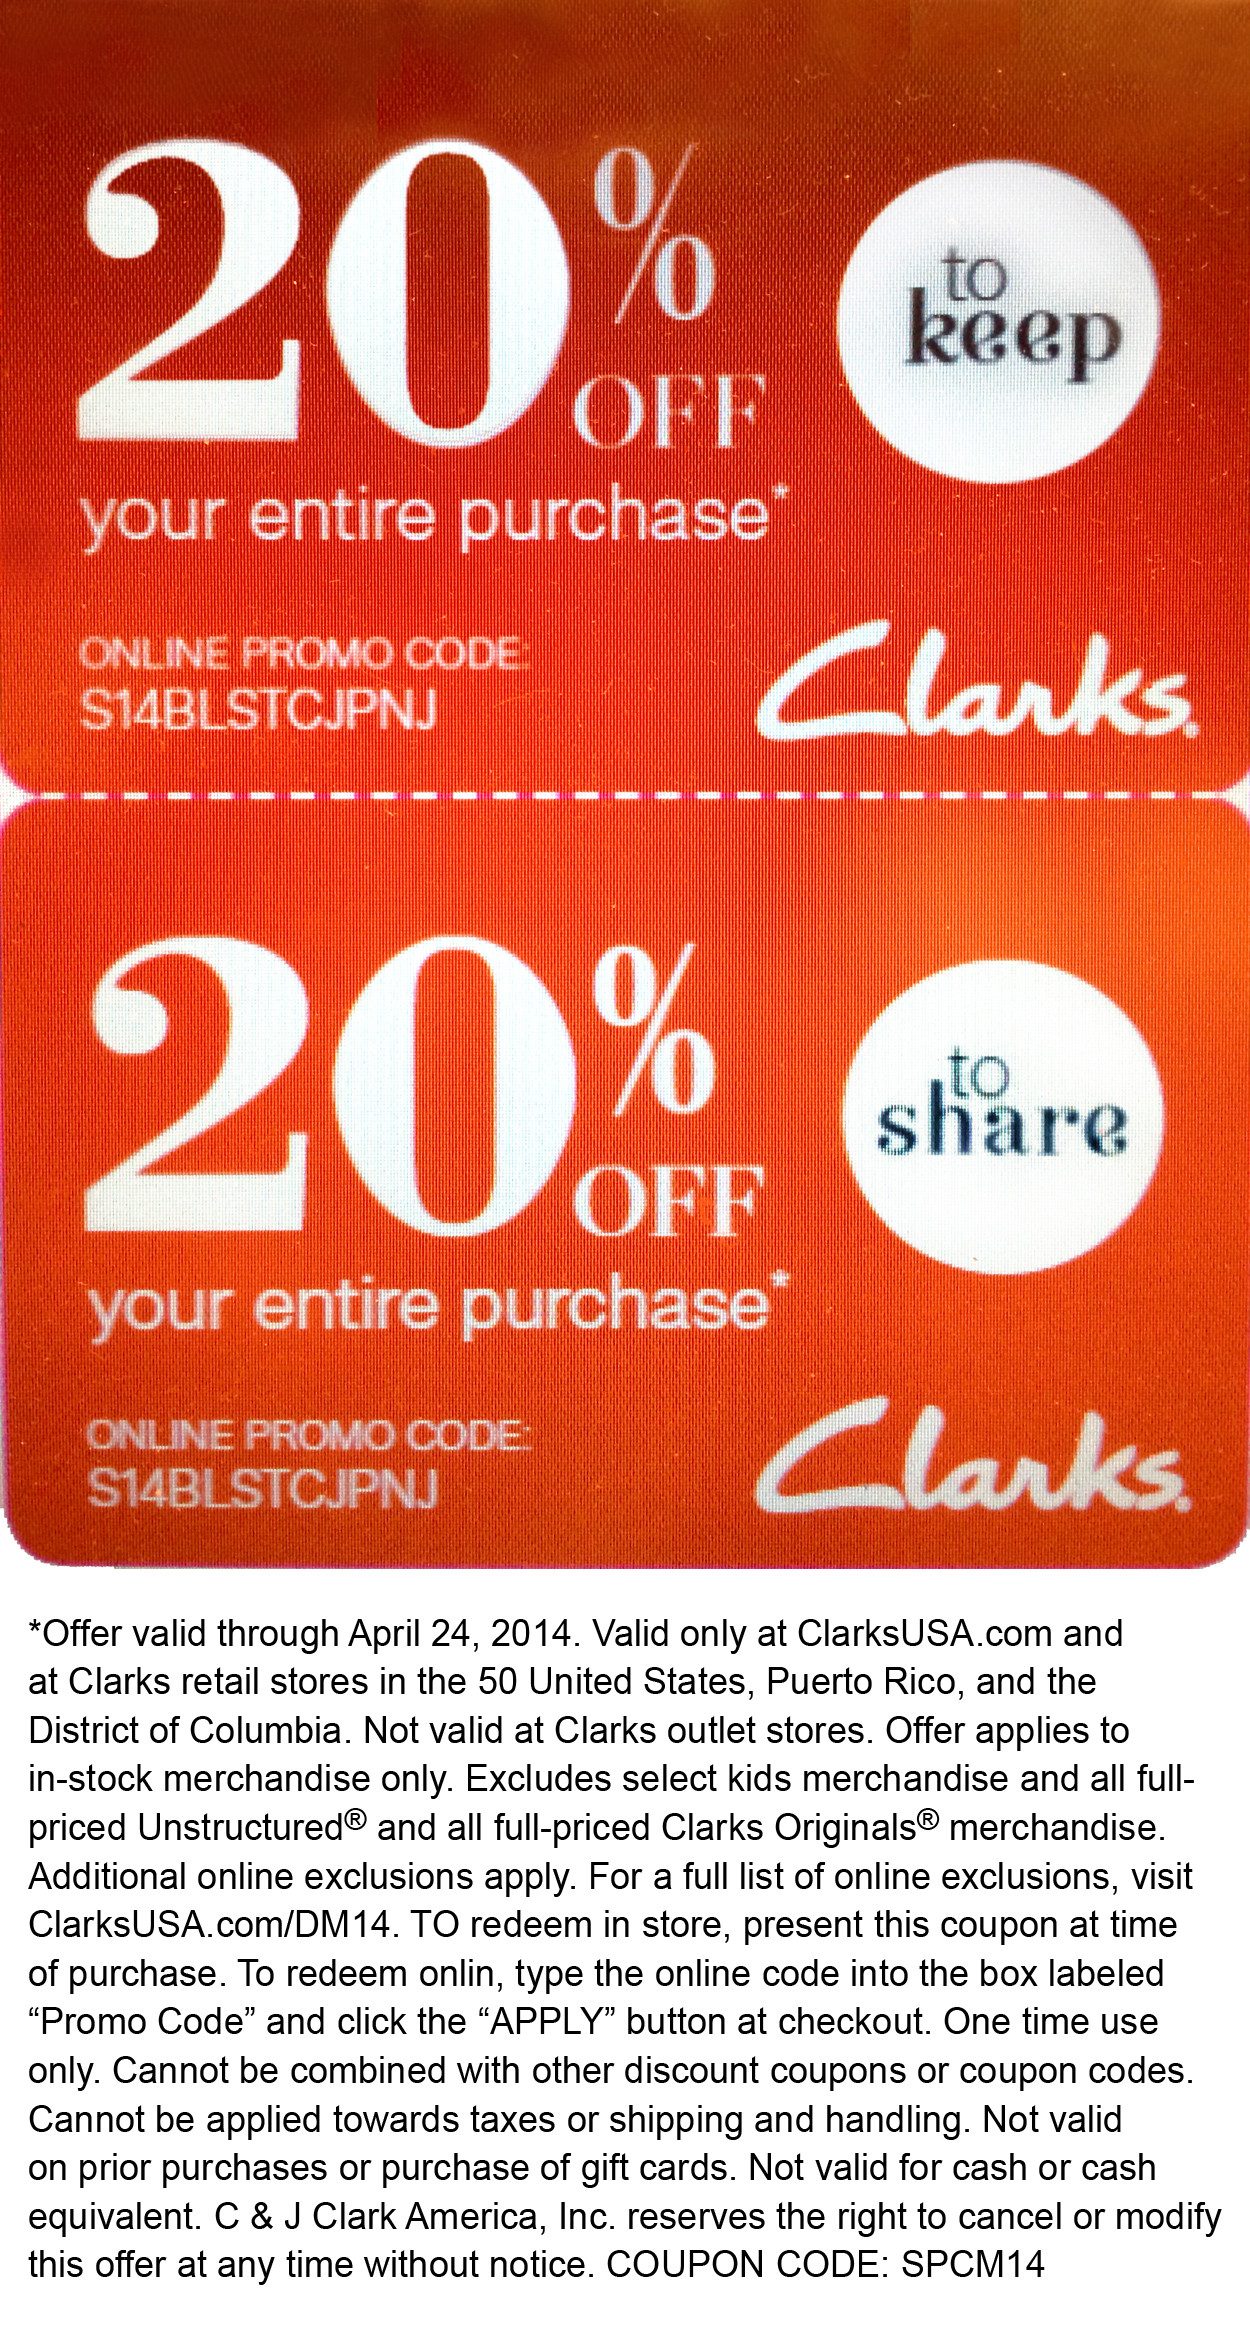 clarks shoes promotional code 2018 off 